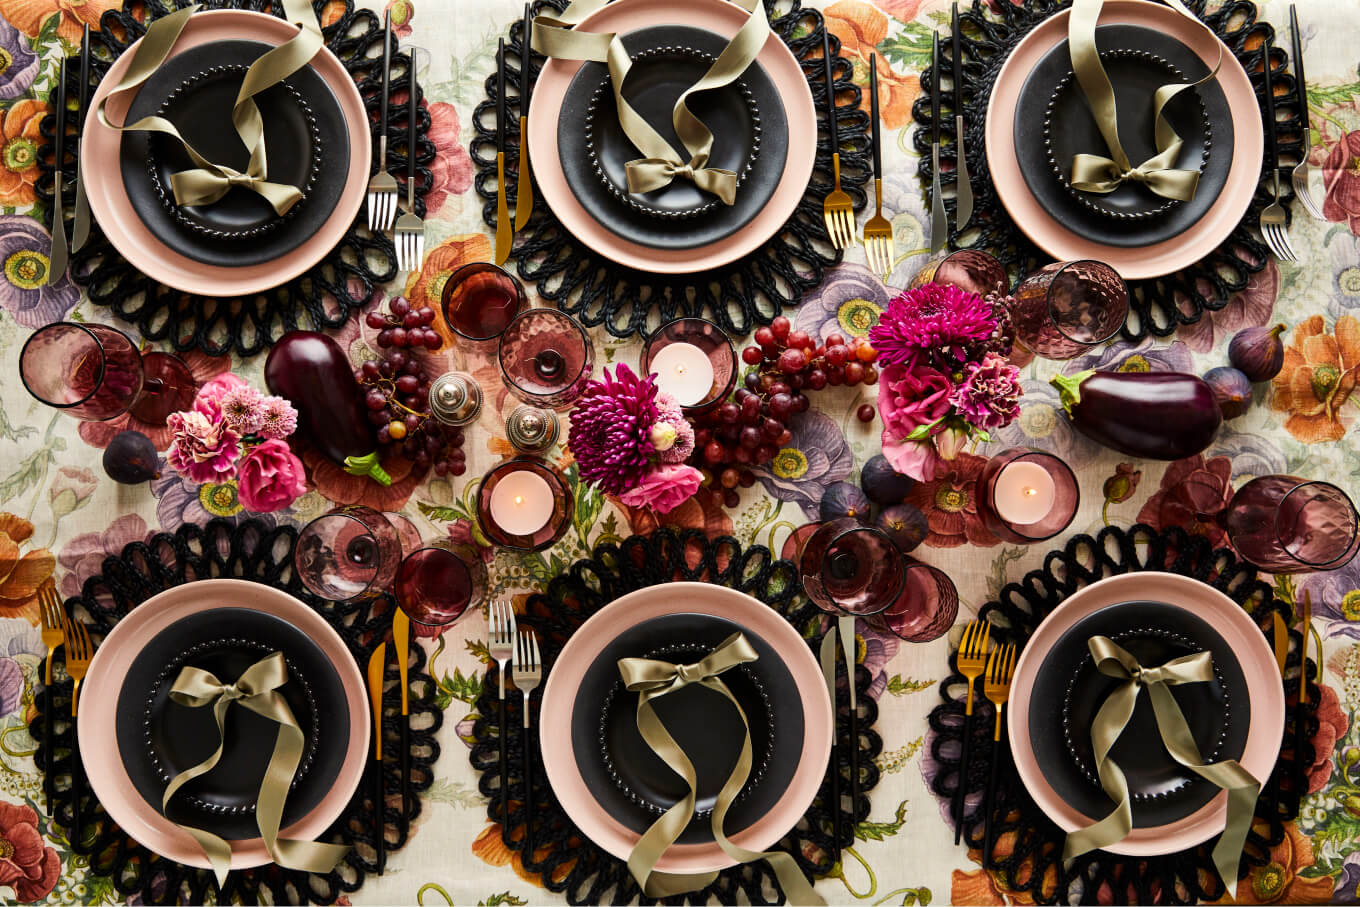 Autumnal Halloween table styling with decadent details of black, pink, purple and gold crockery and glassware from The Social Kitchen